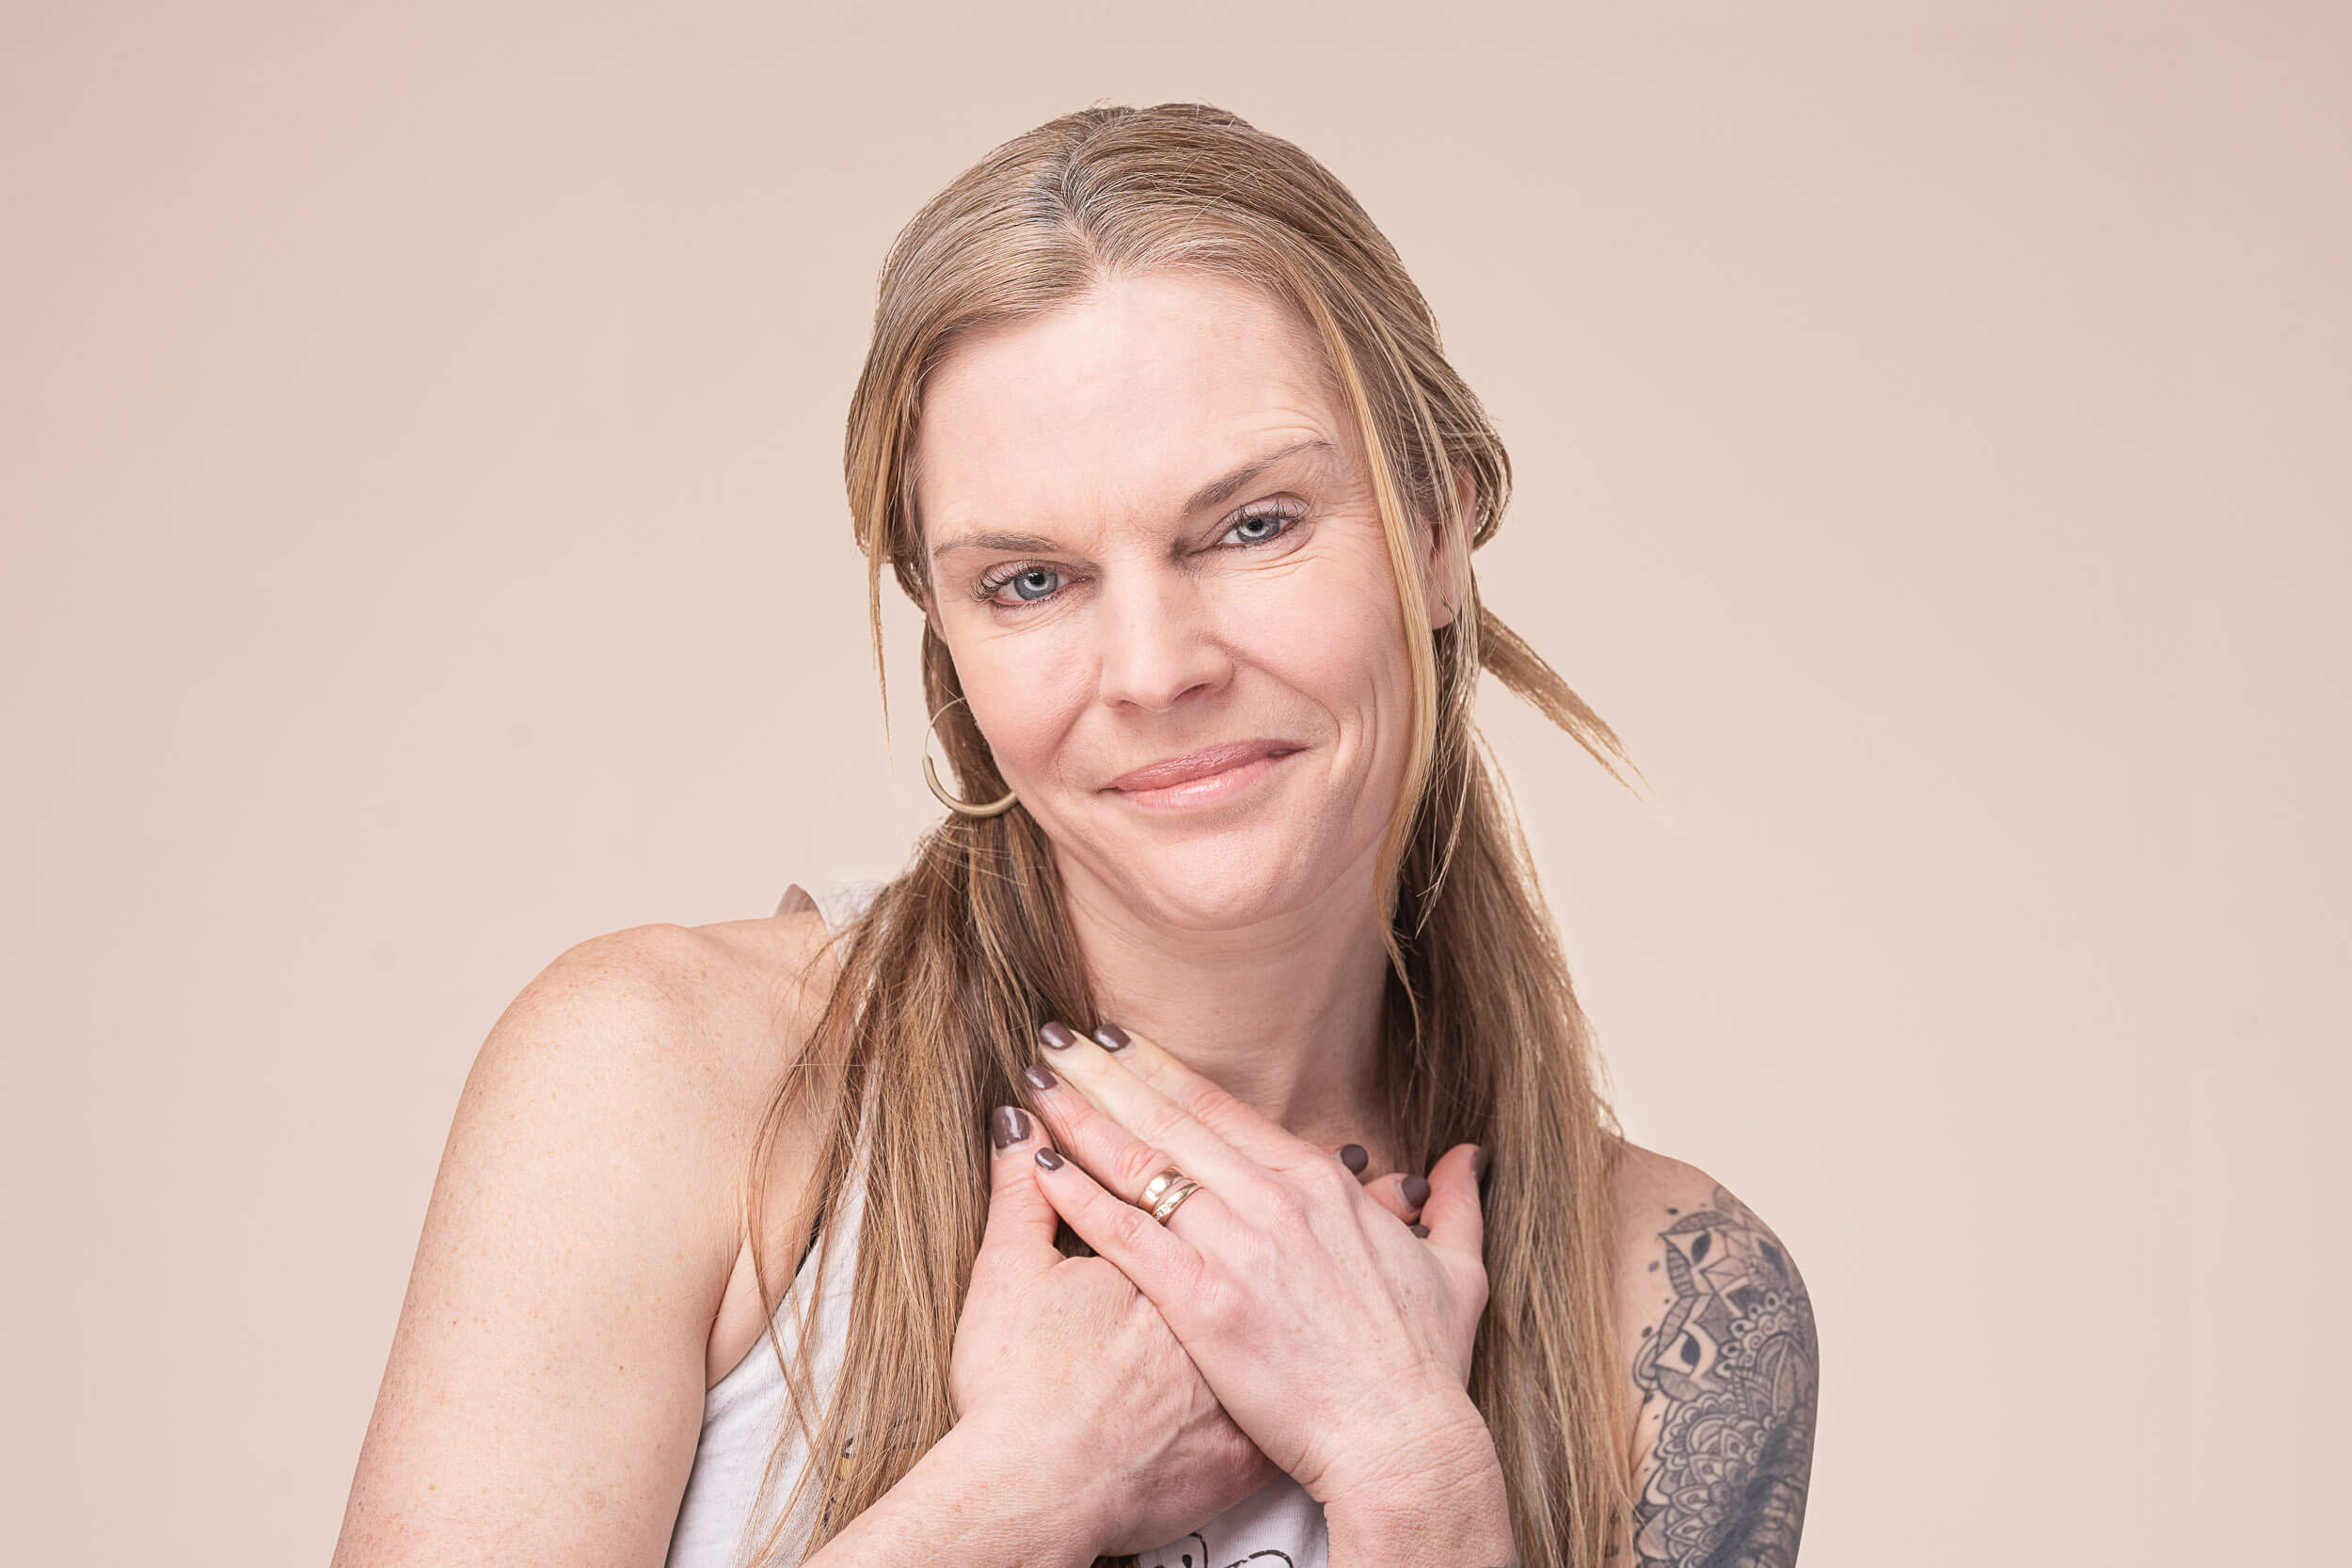 Experienced yoga instructor with a confident gaze and hands gently placed on heart, wearing a sleeveless top and showcasing her arm tattoo, representing the blend of strength and grace at Shala Yoga studio in Squamish.